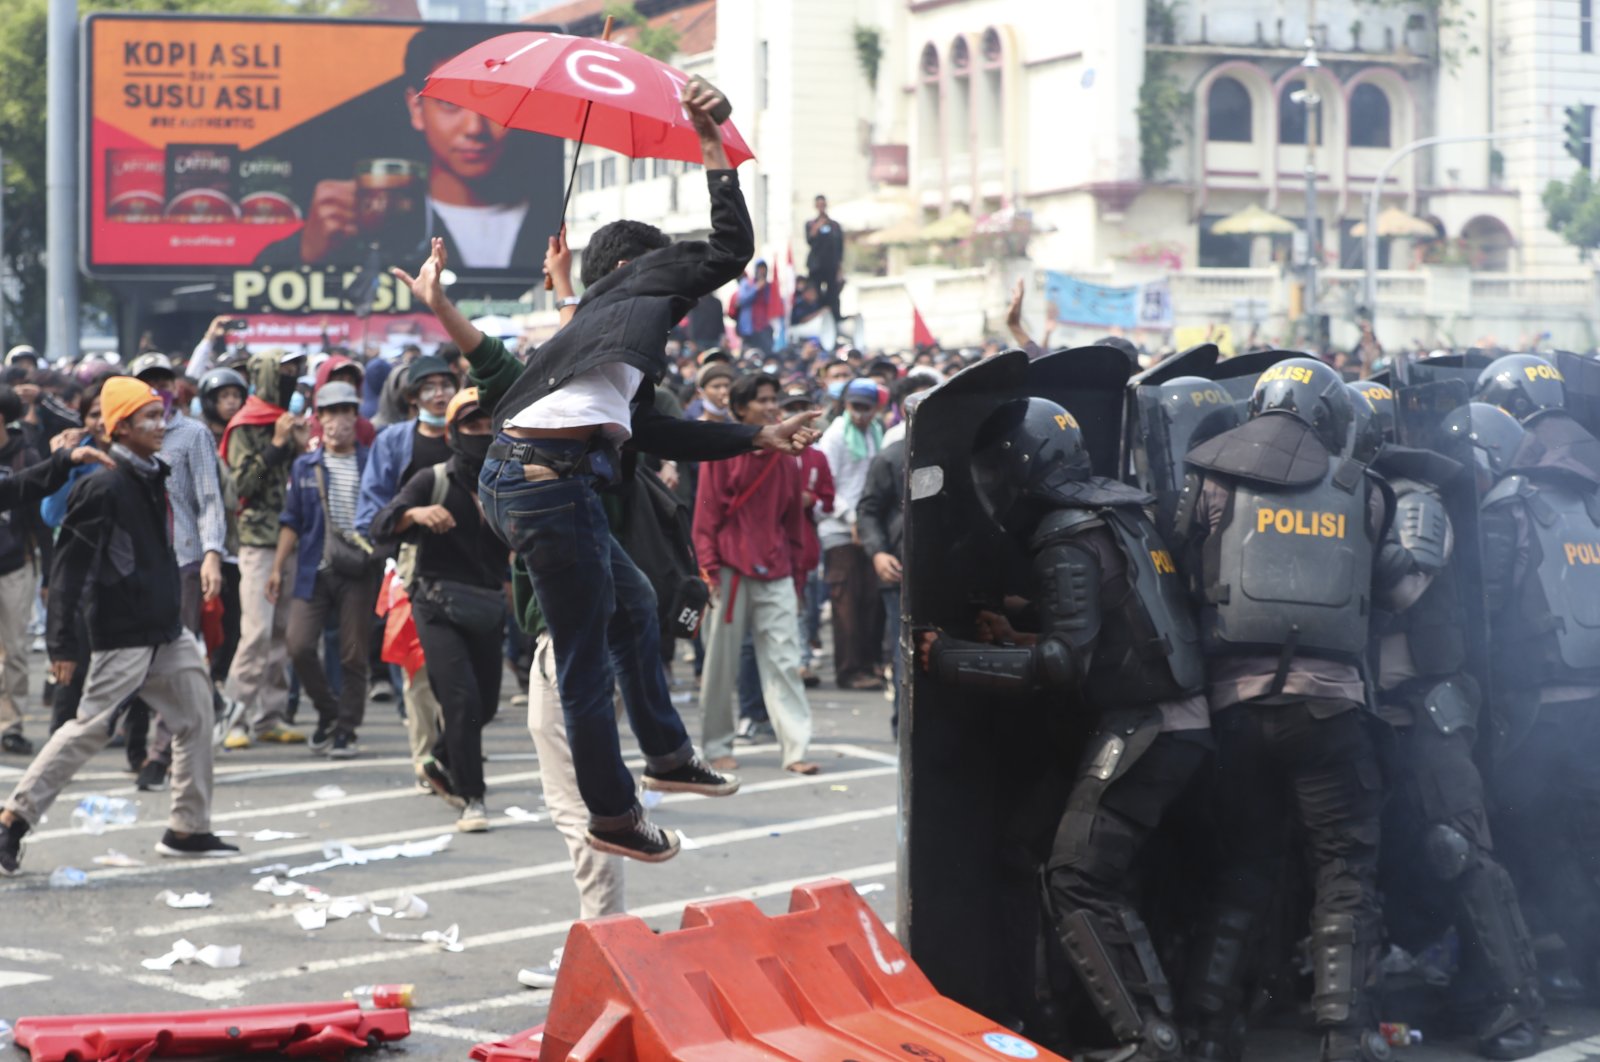 A protester tries to hurl a brick toward police trying block protesters from advancing on the presidential palace during a rally in Jakarta, Indonesia, Oct. 8, 2020. (AP Photo)